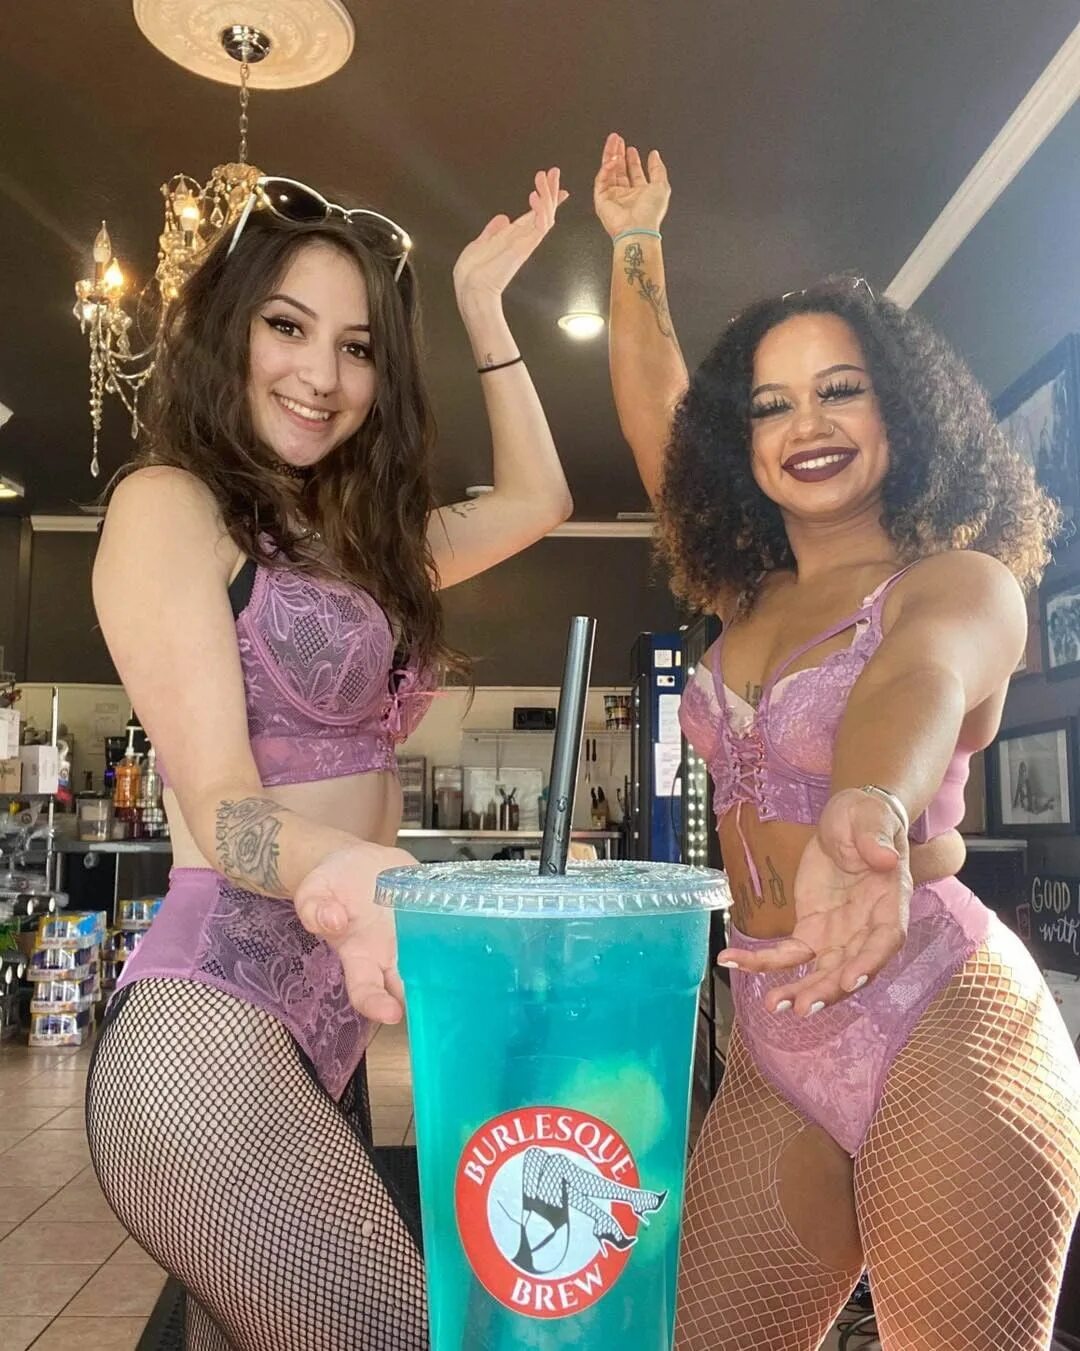 Burlesque Brew в Instagram: "Come cool down with a delicious drink fro...